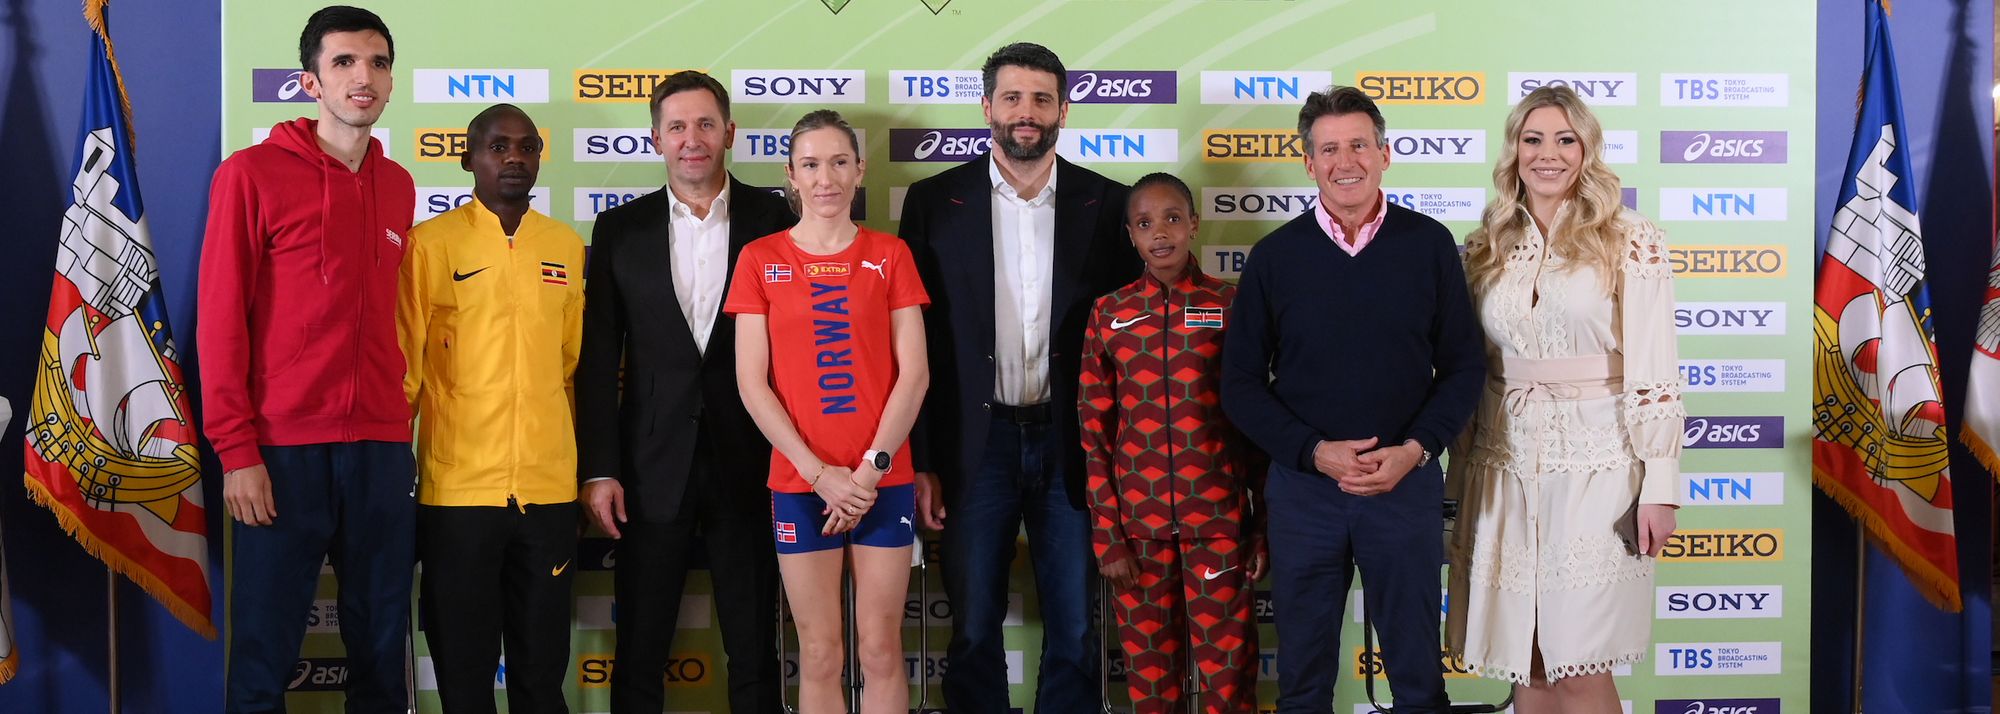 World Athletics President Sebastian Coe underlined the importance of the World Athletics Cross Country Championships on the eve of this year’s event in Belgrade on 30 March.